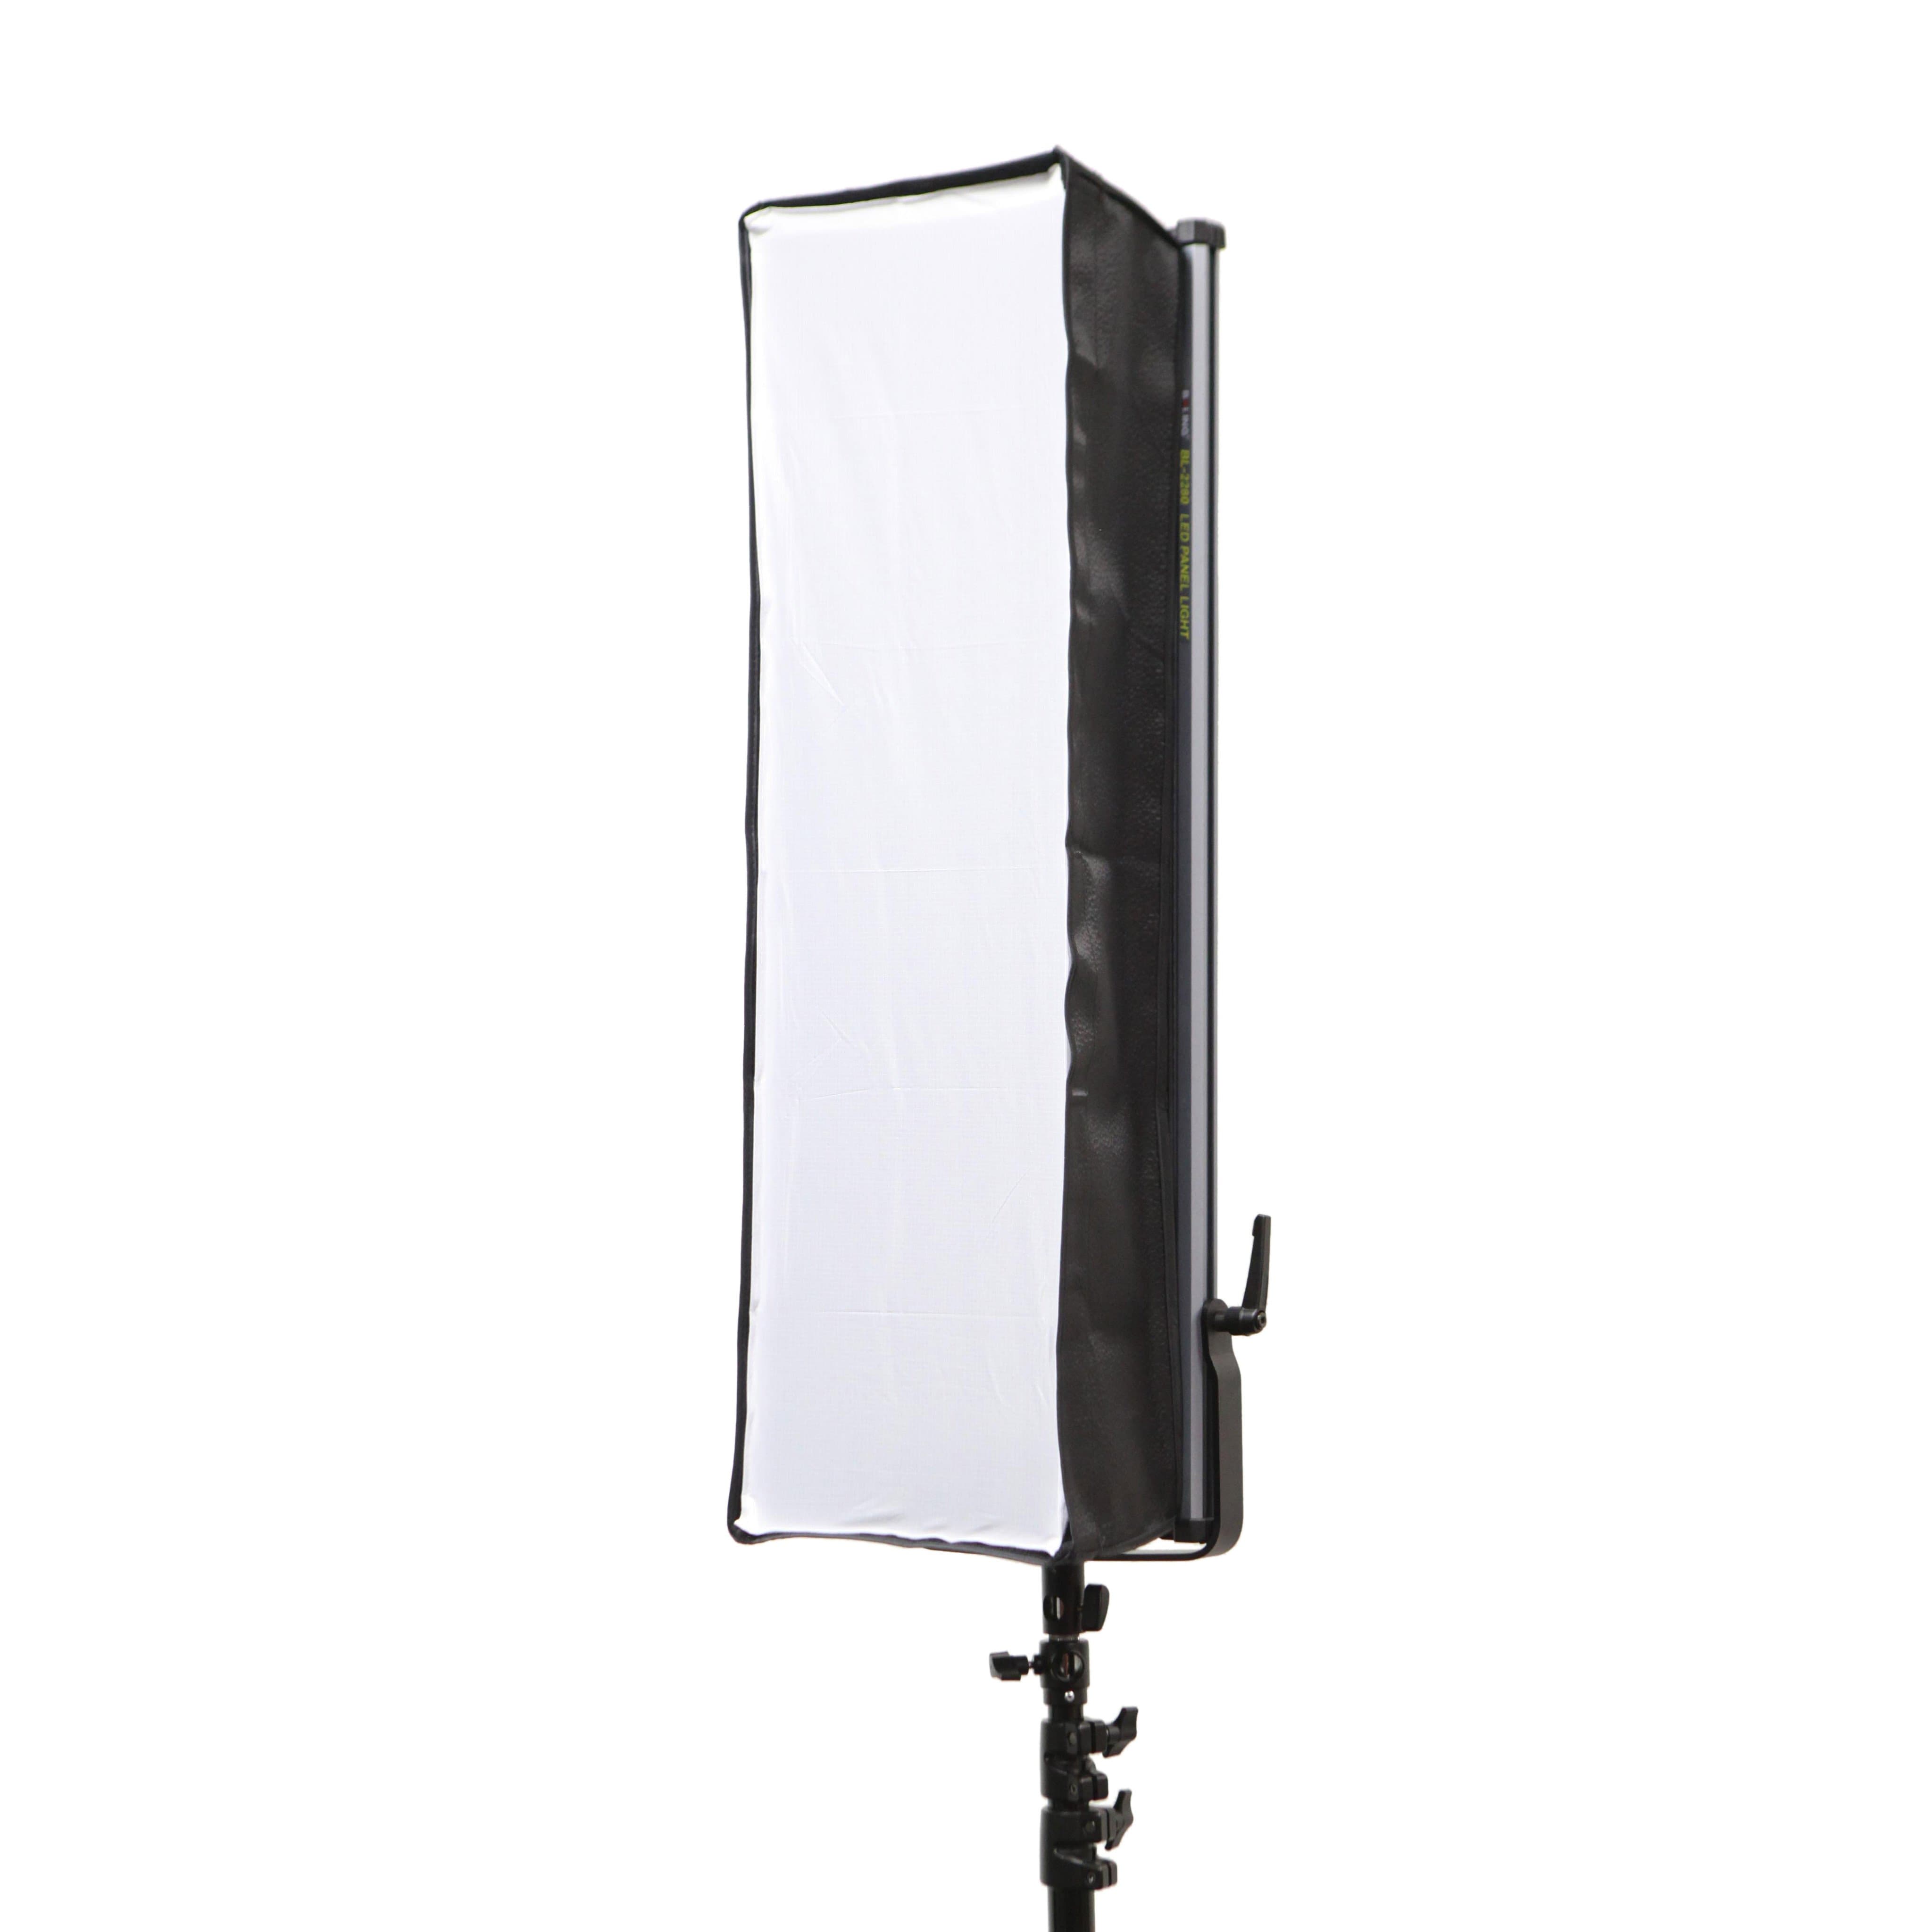 Boling LED Panel Softbox and Grid for 2220P 2250P 2280P Panels